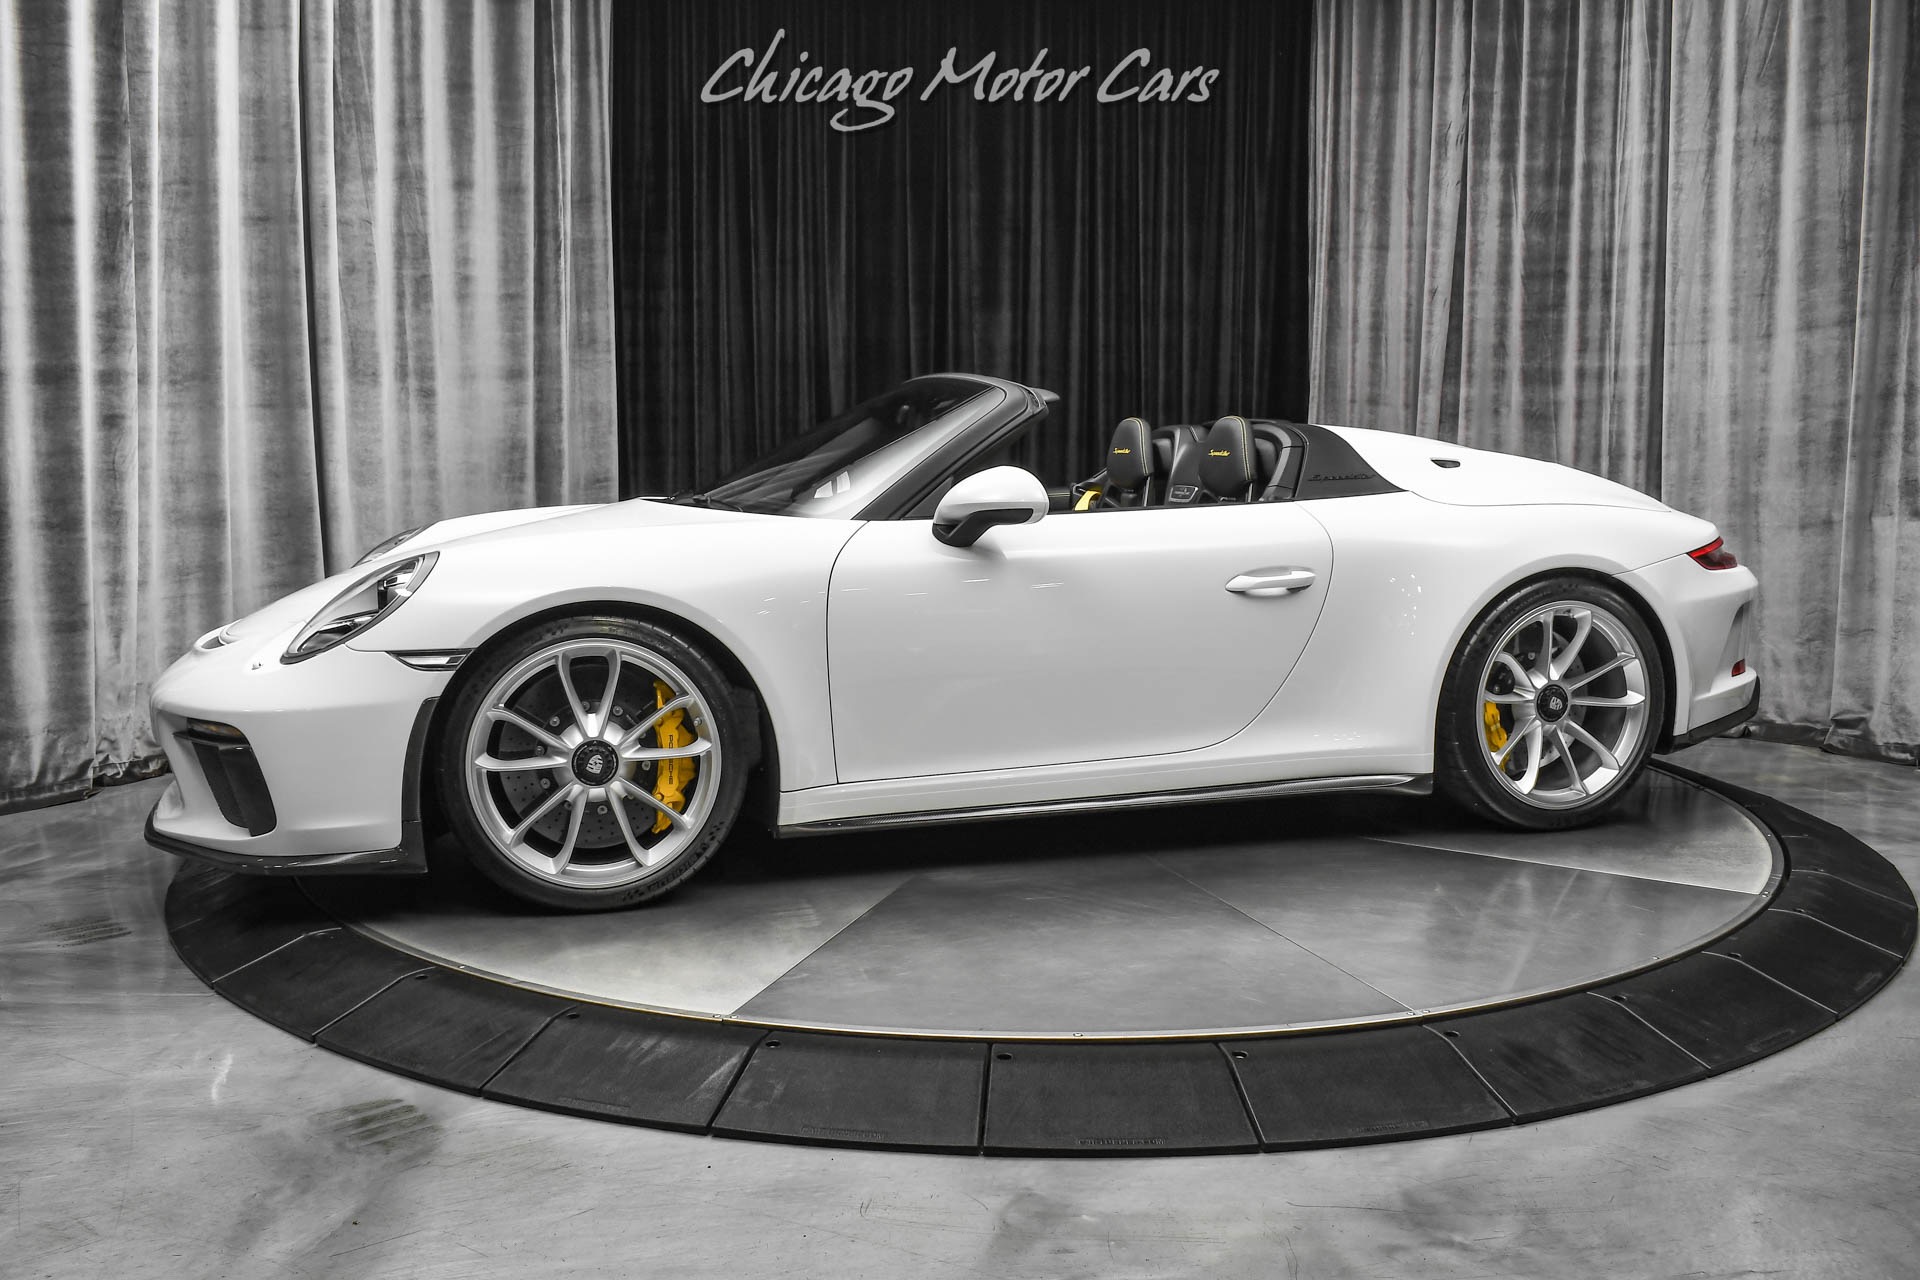 Used-2019-Porsche-911-Speedster-Convertible-LOW-Miles-Front-Lift-Chrono-6-Speed-Manual-LOADED